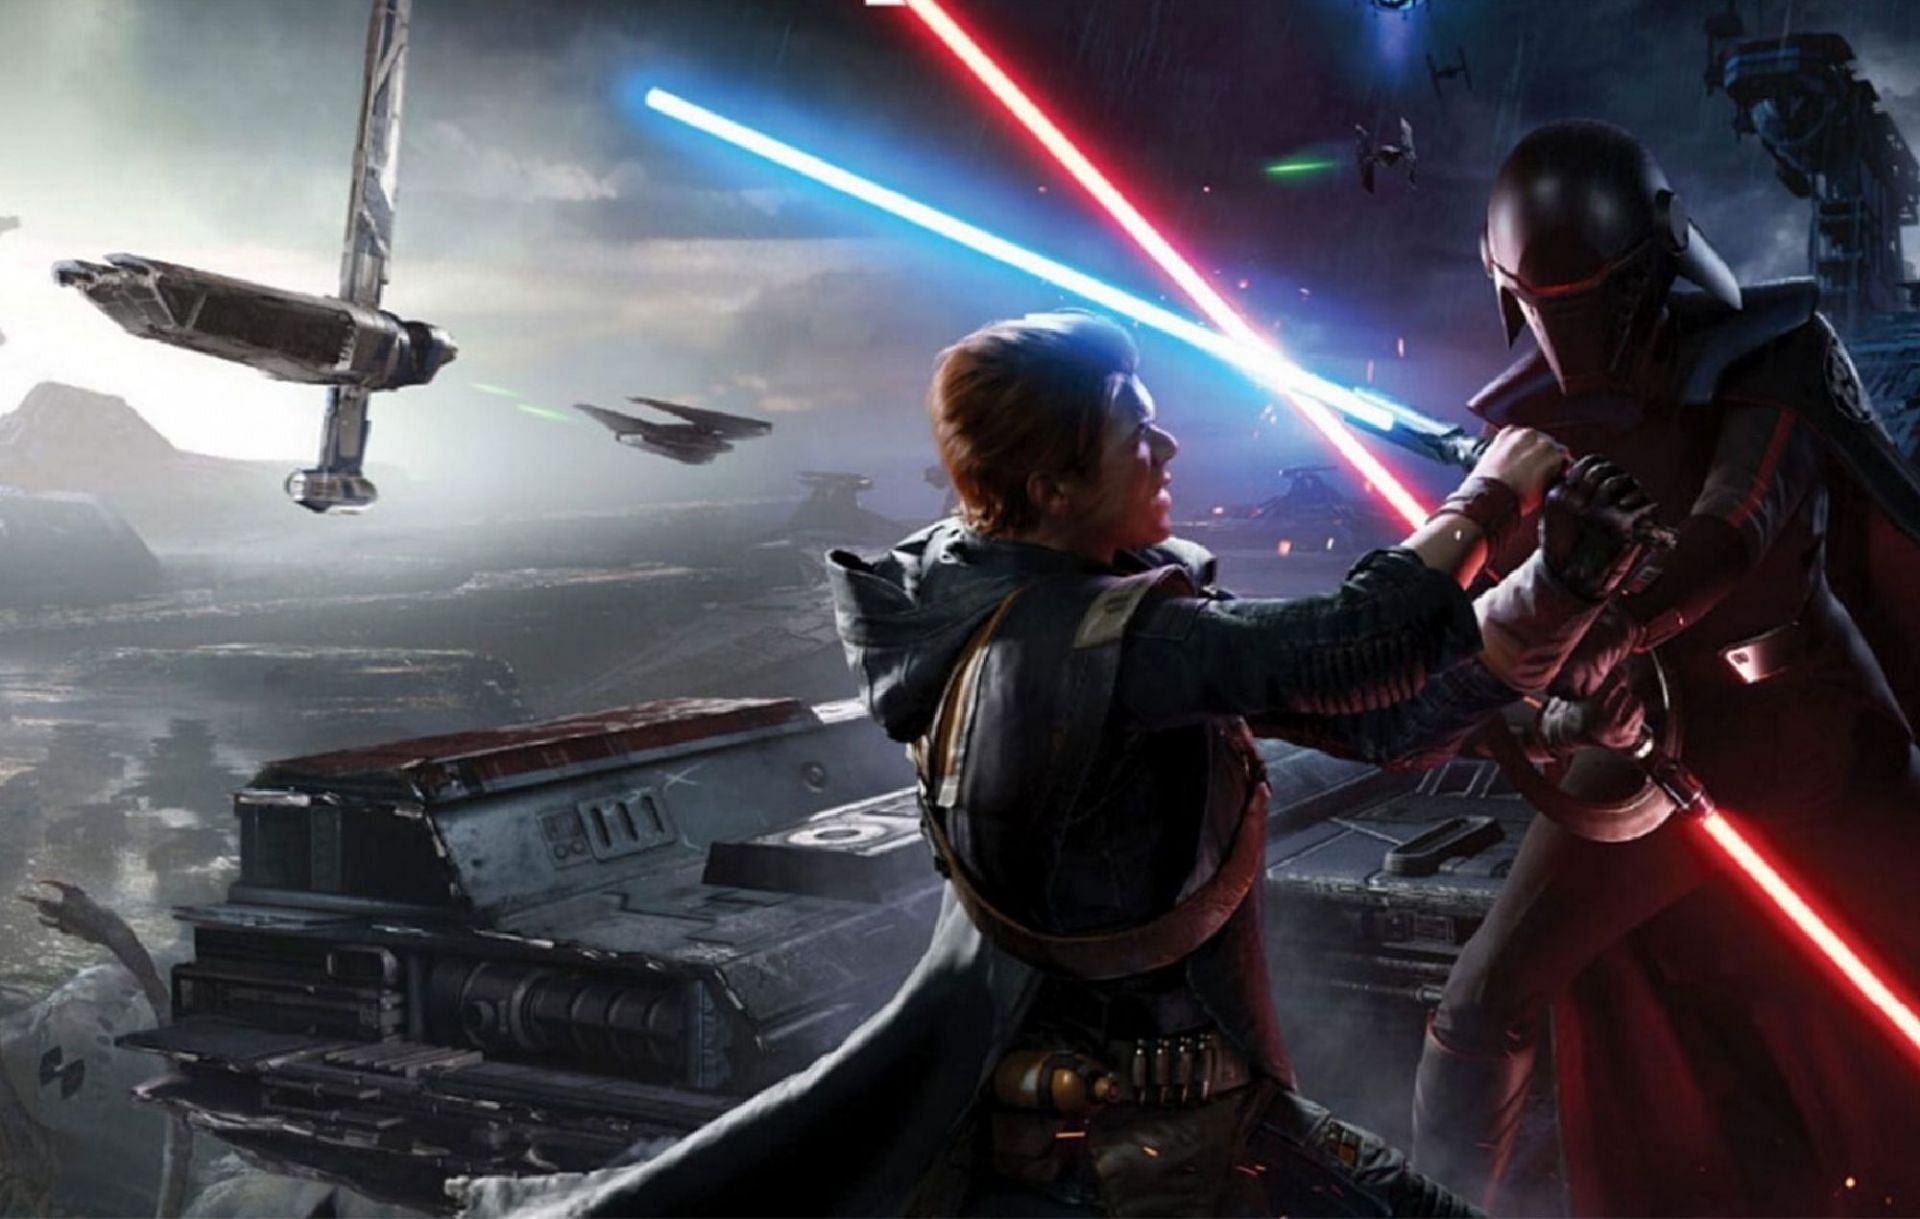 Multiple Star Wars games are in development (Image via NME)